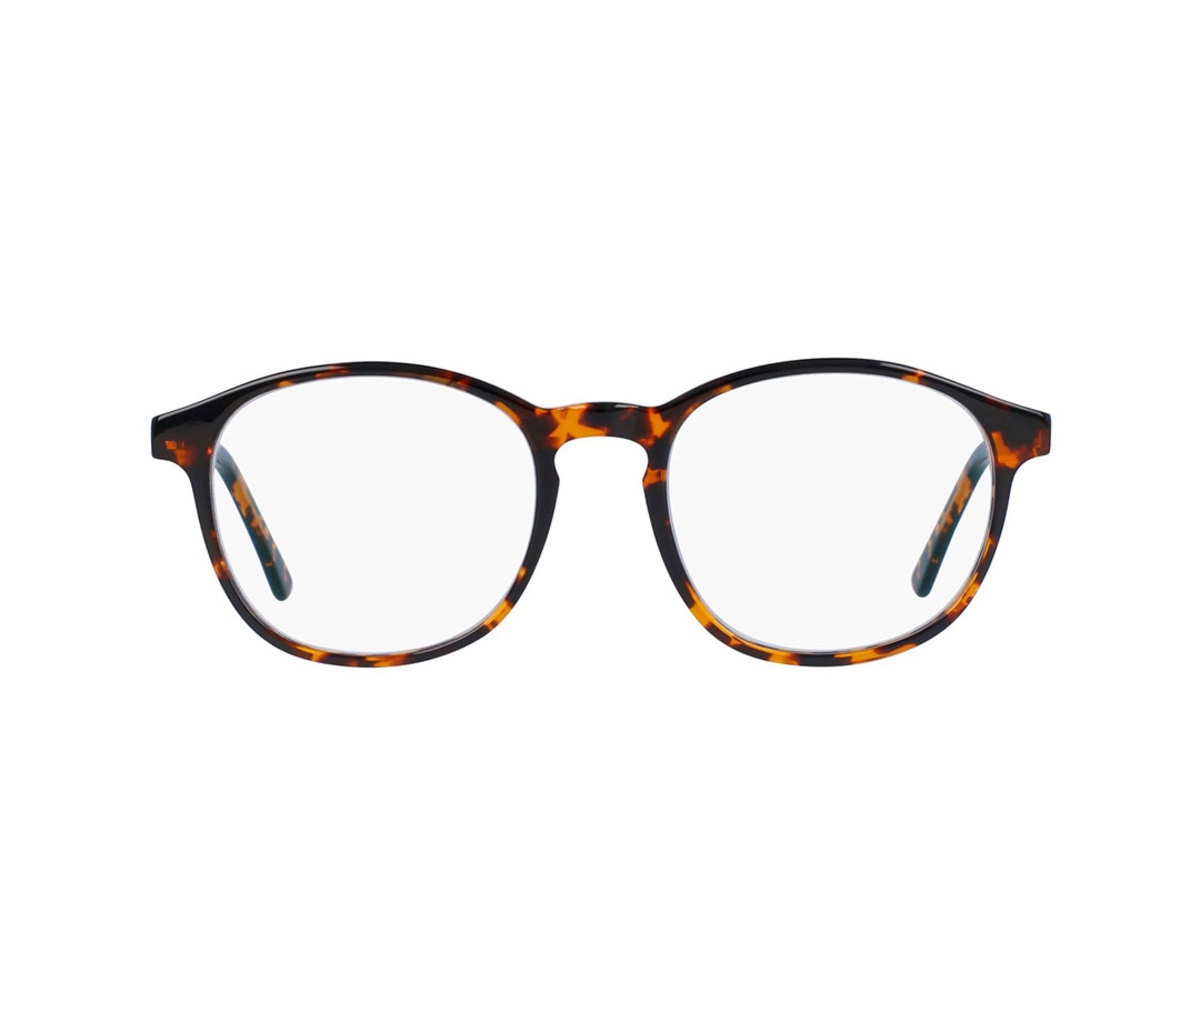 The Most Stylish Men's Eyeglasses You Can Buy Online - Men's Journal